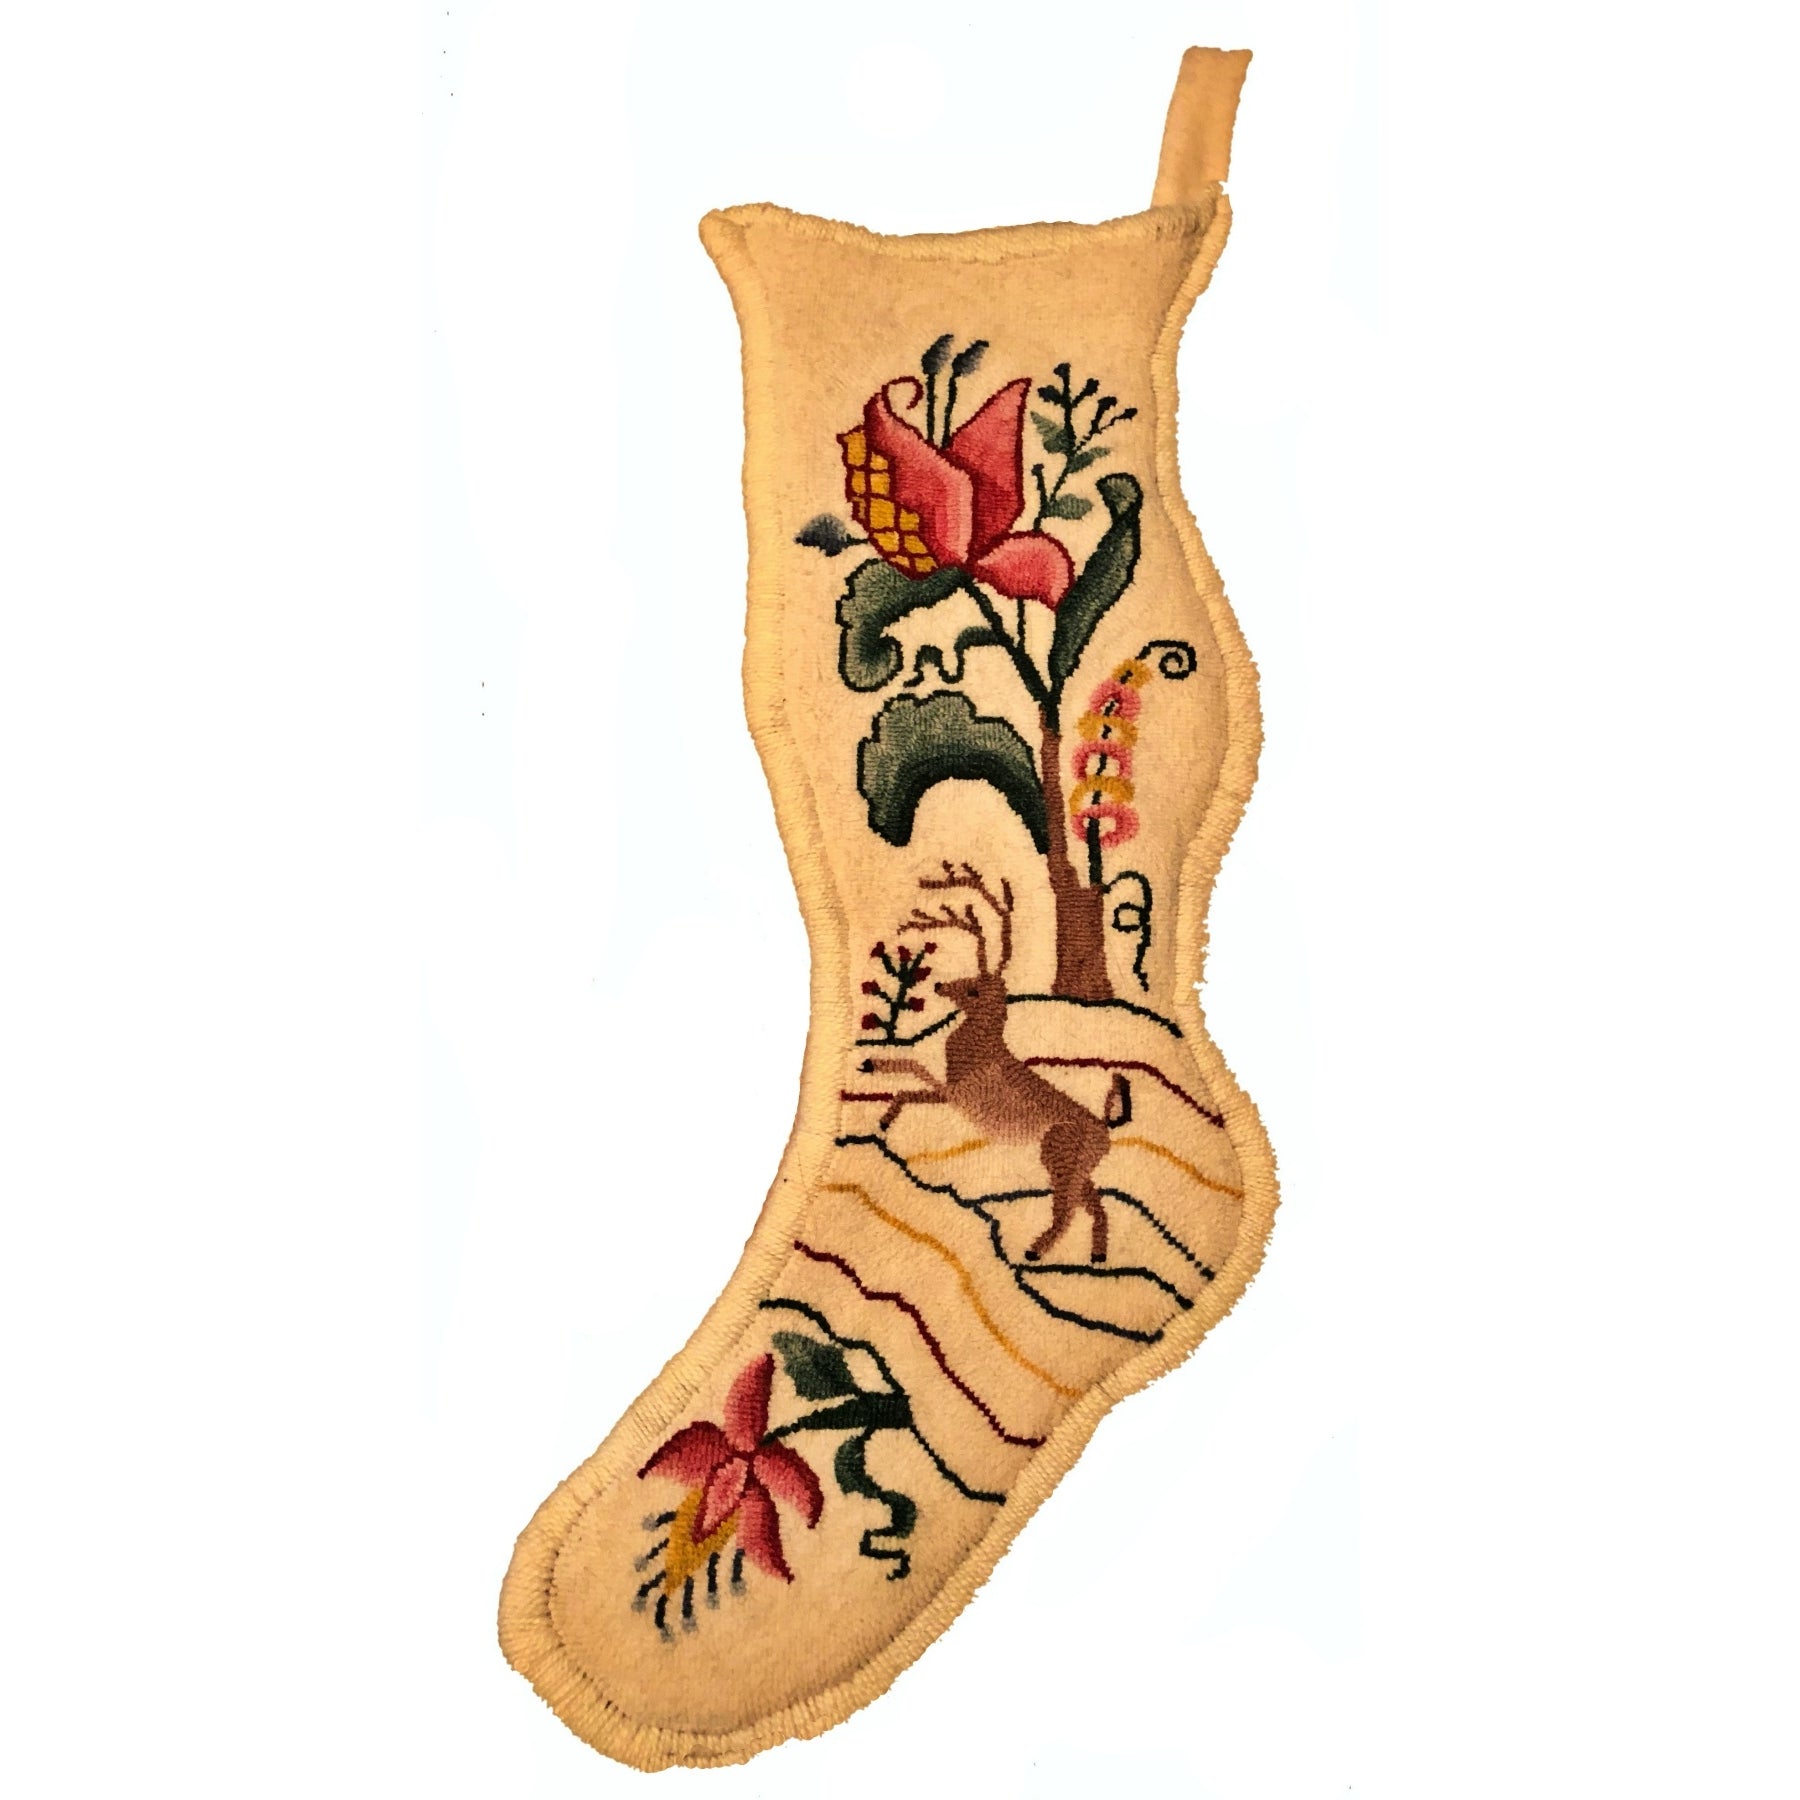 Christmas Stocking, rug hooked by Sarah Miller